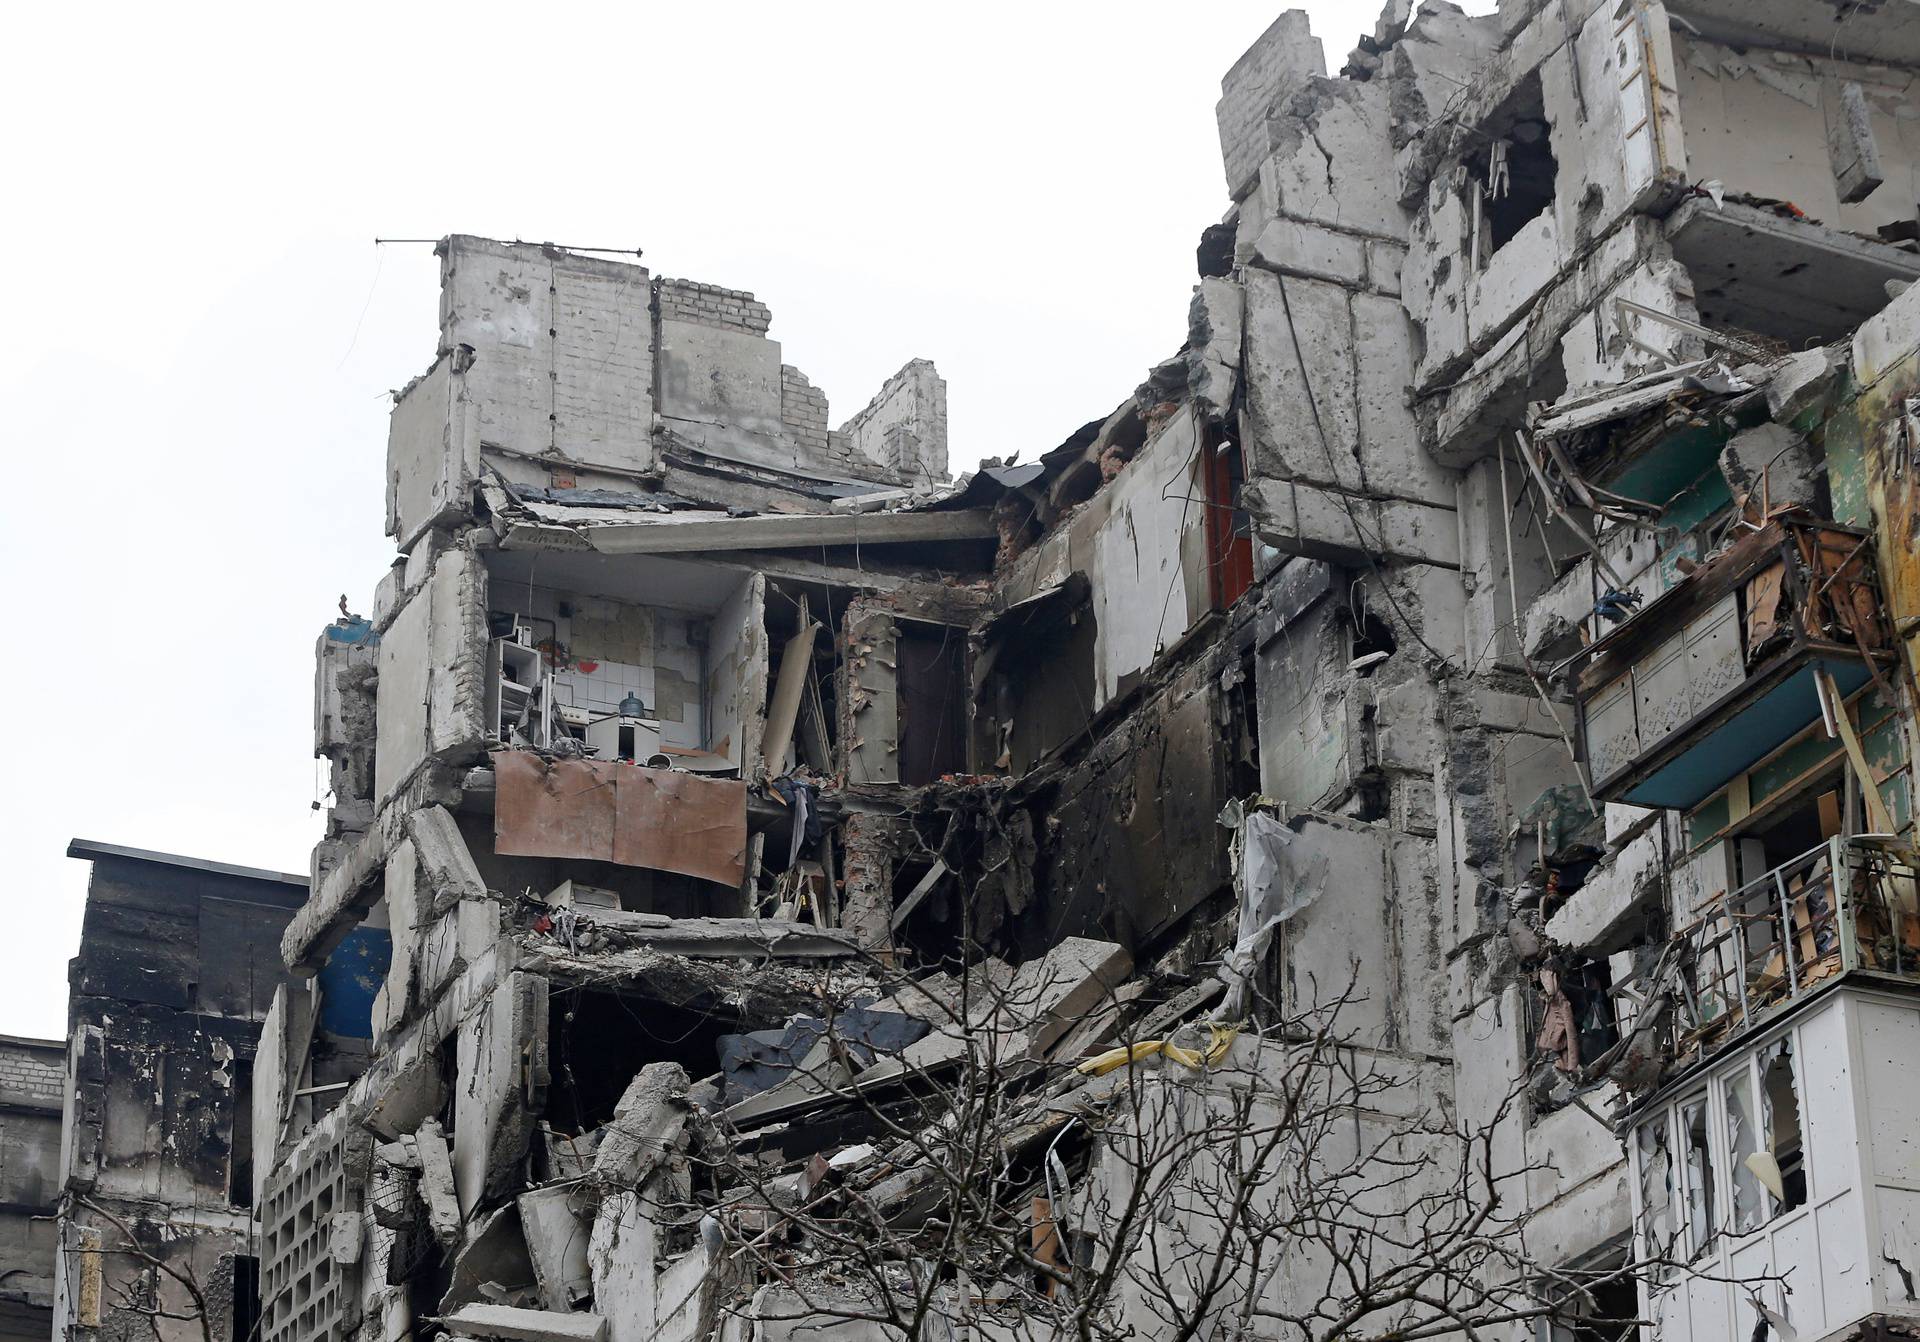 A view shows a heavily damaged apartment building in the besieged city of Mariupol